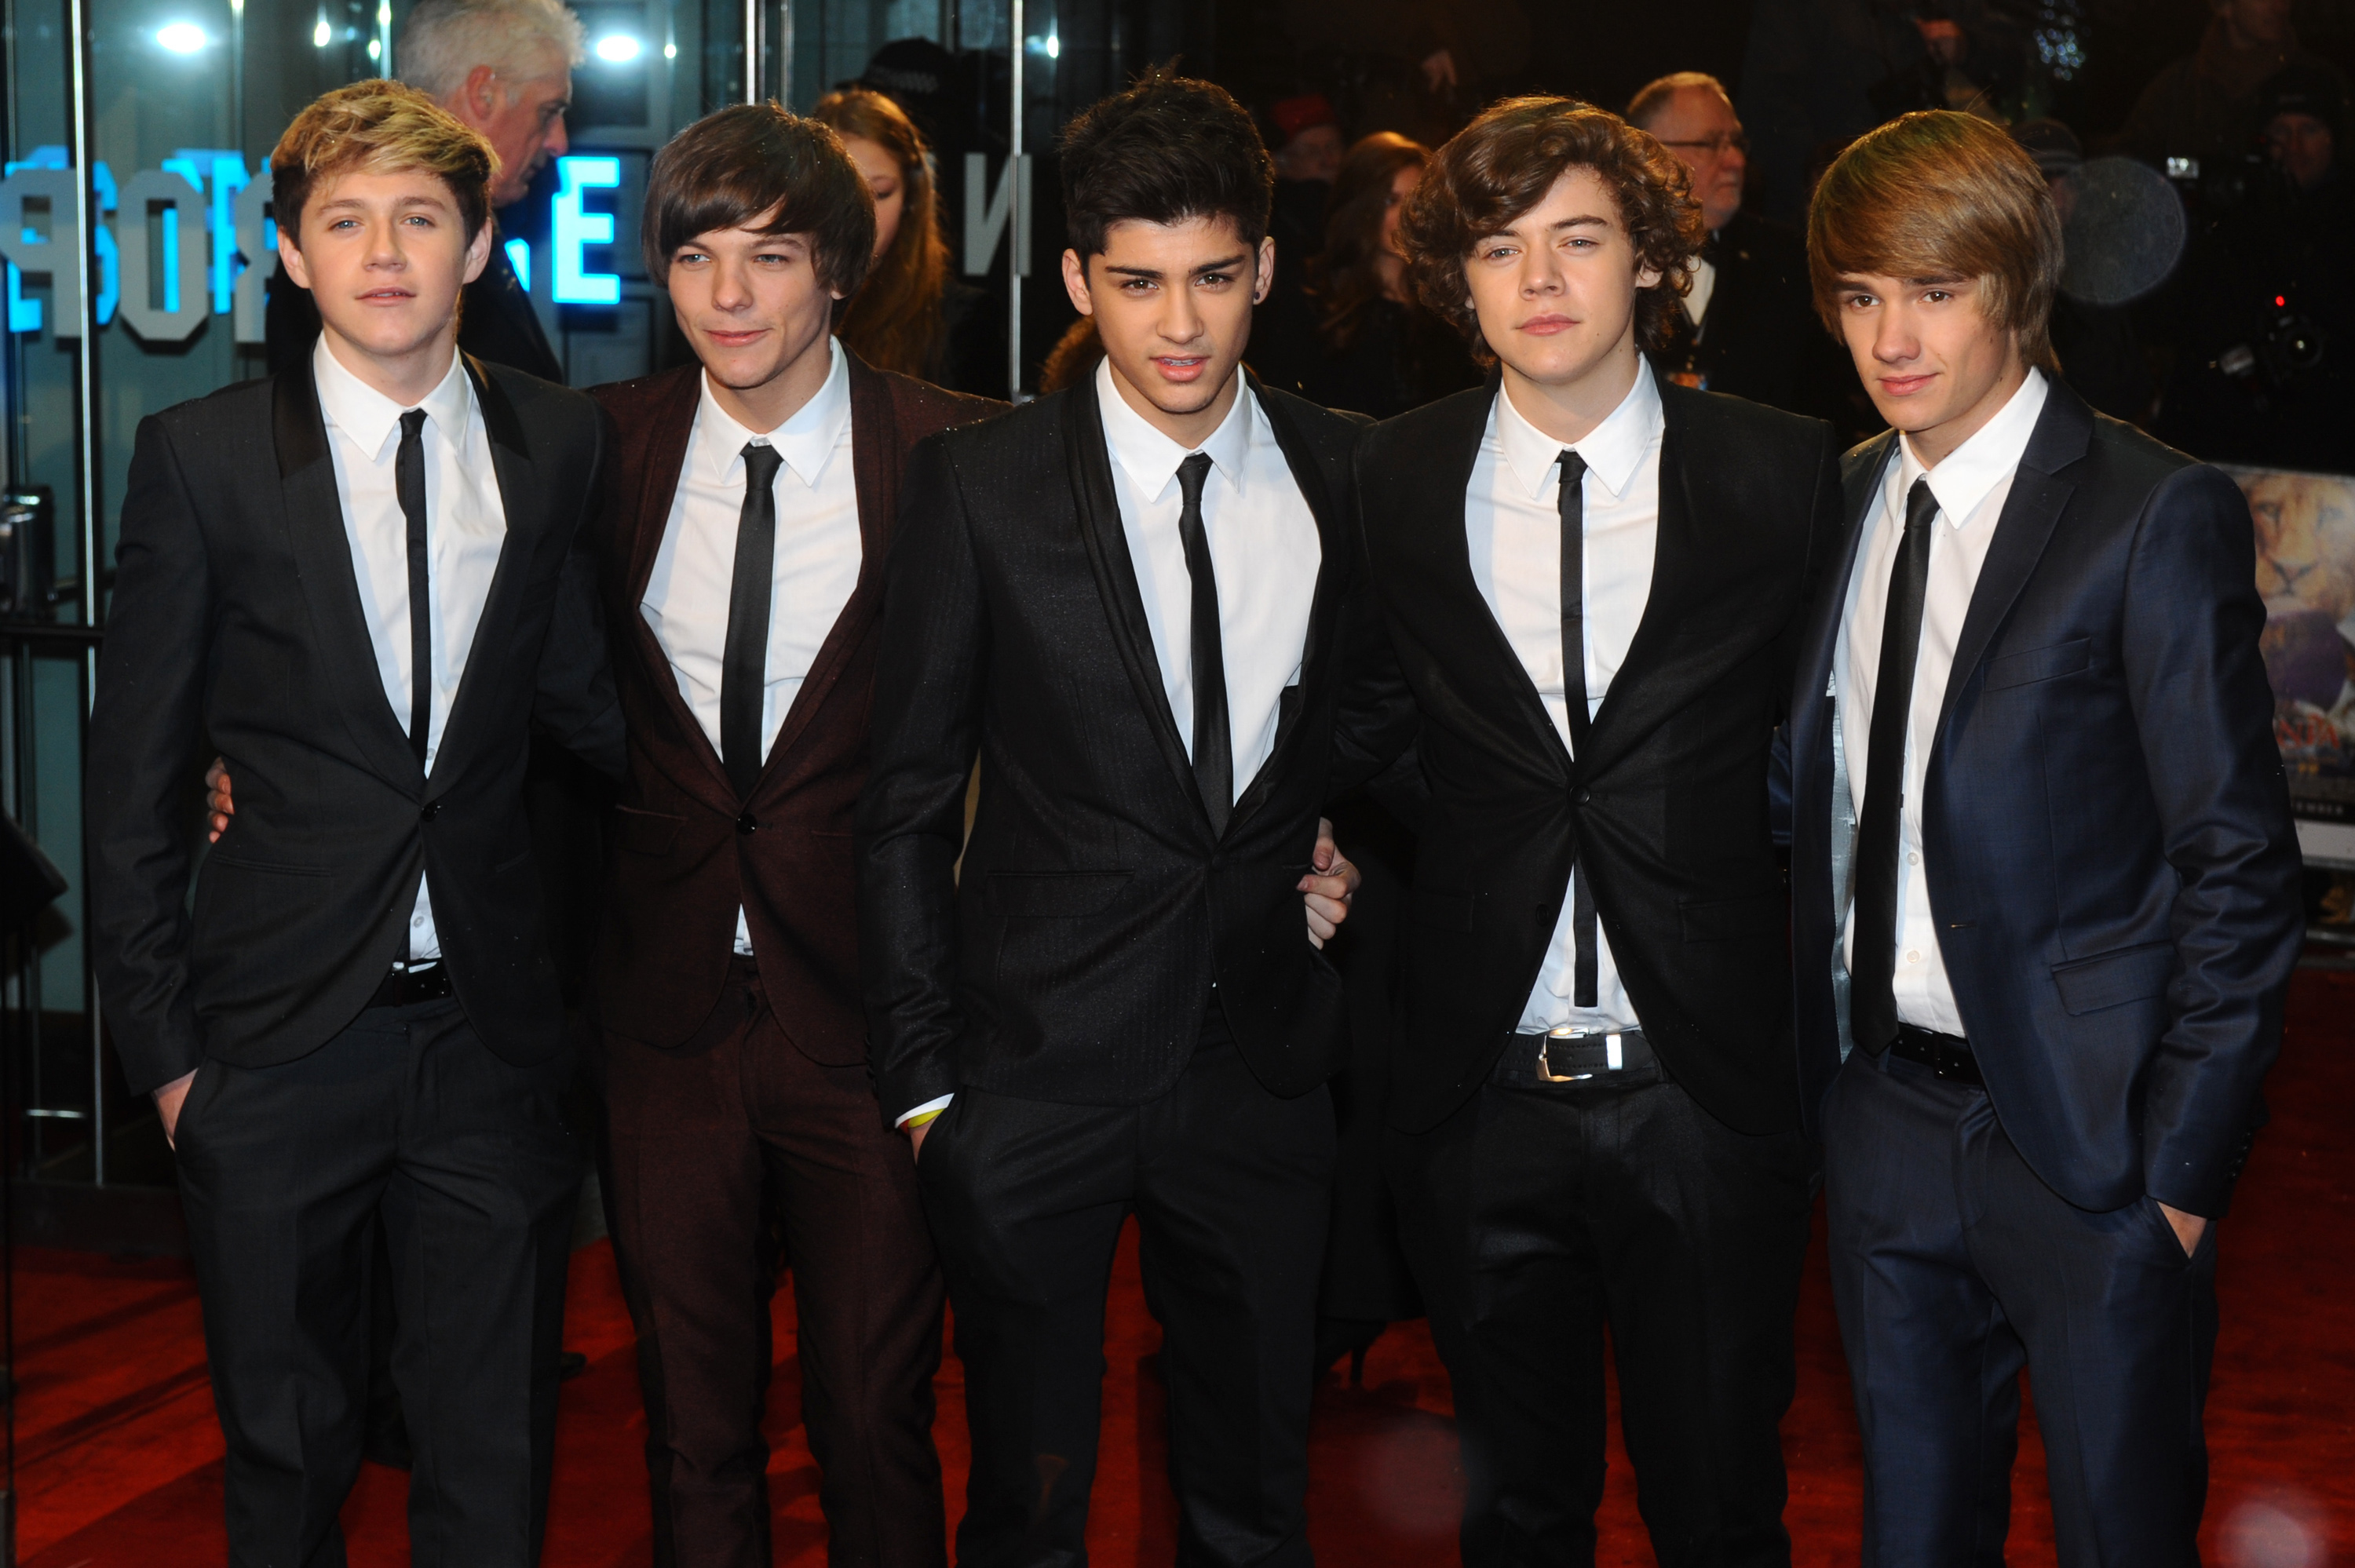 The One Direction boys posing on a red carpet